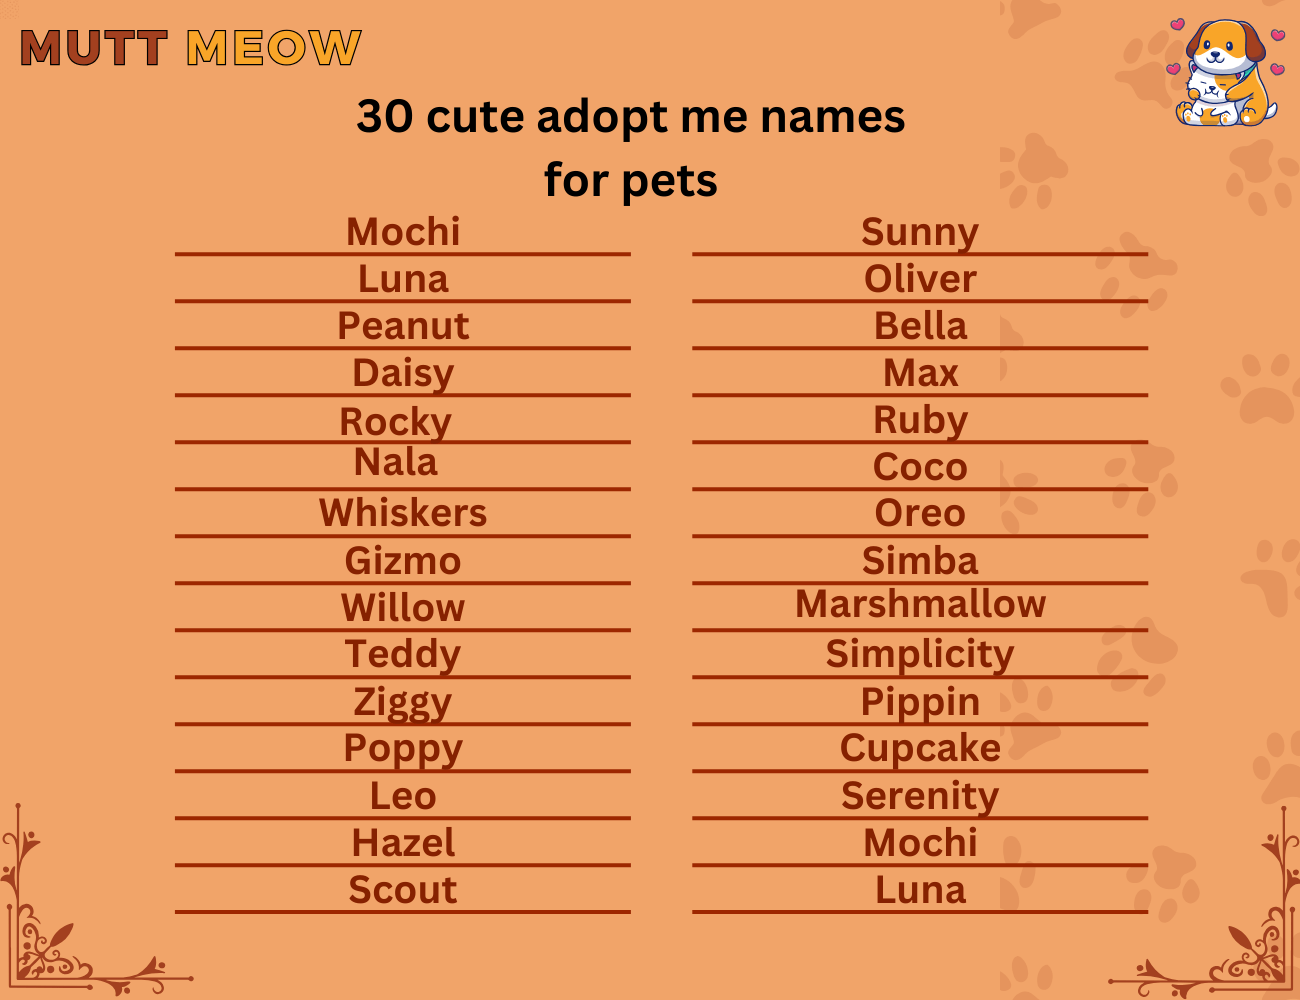 30 cute adopt me names for pets